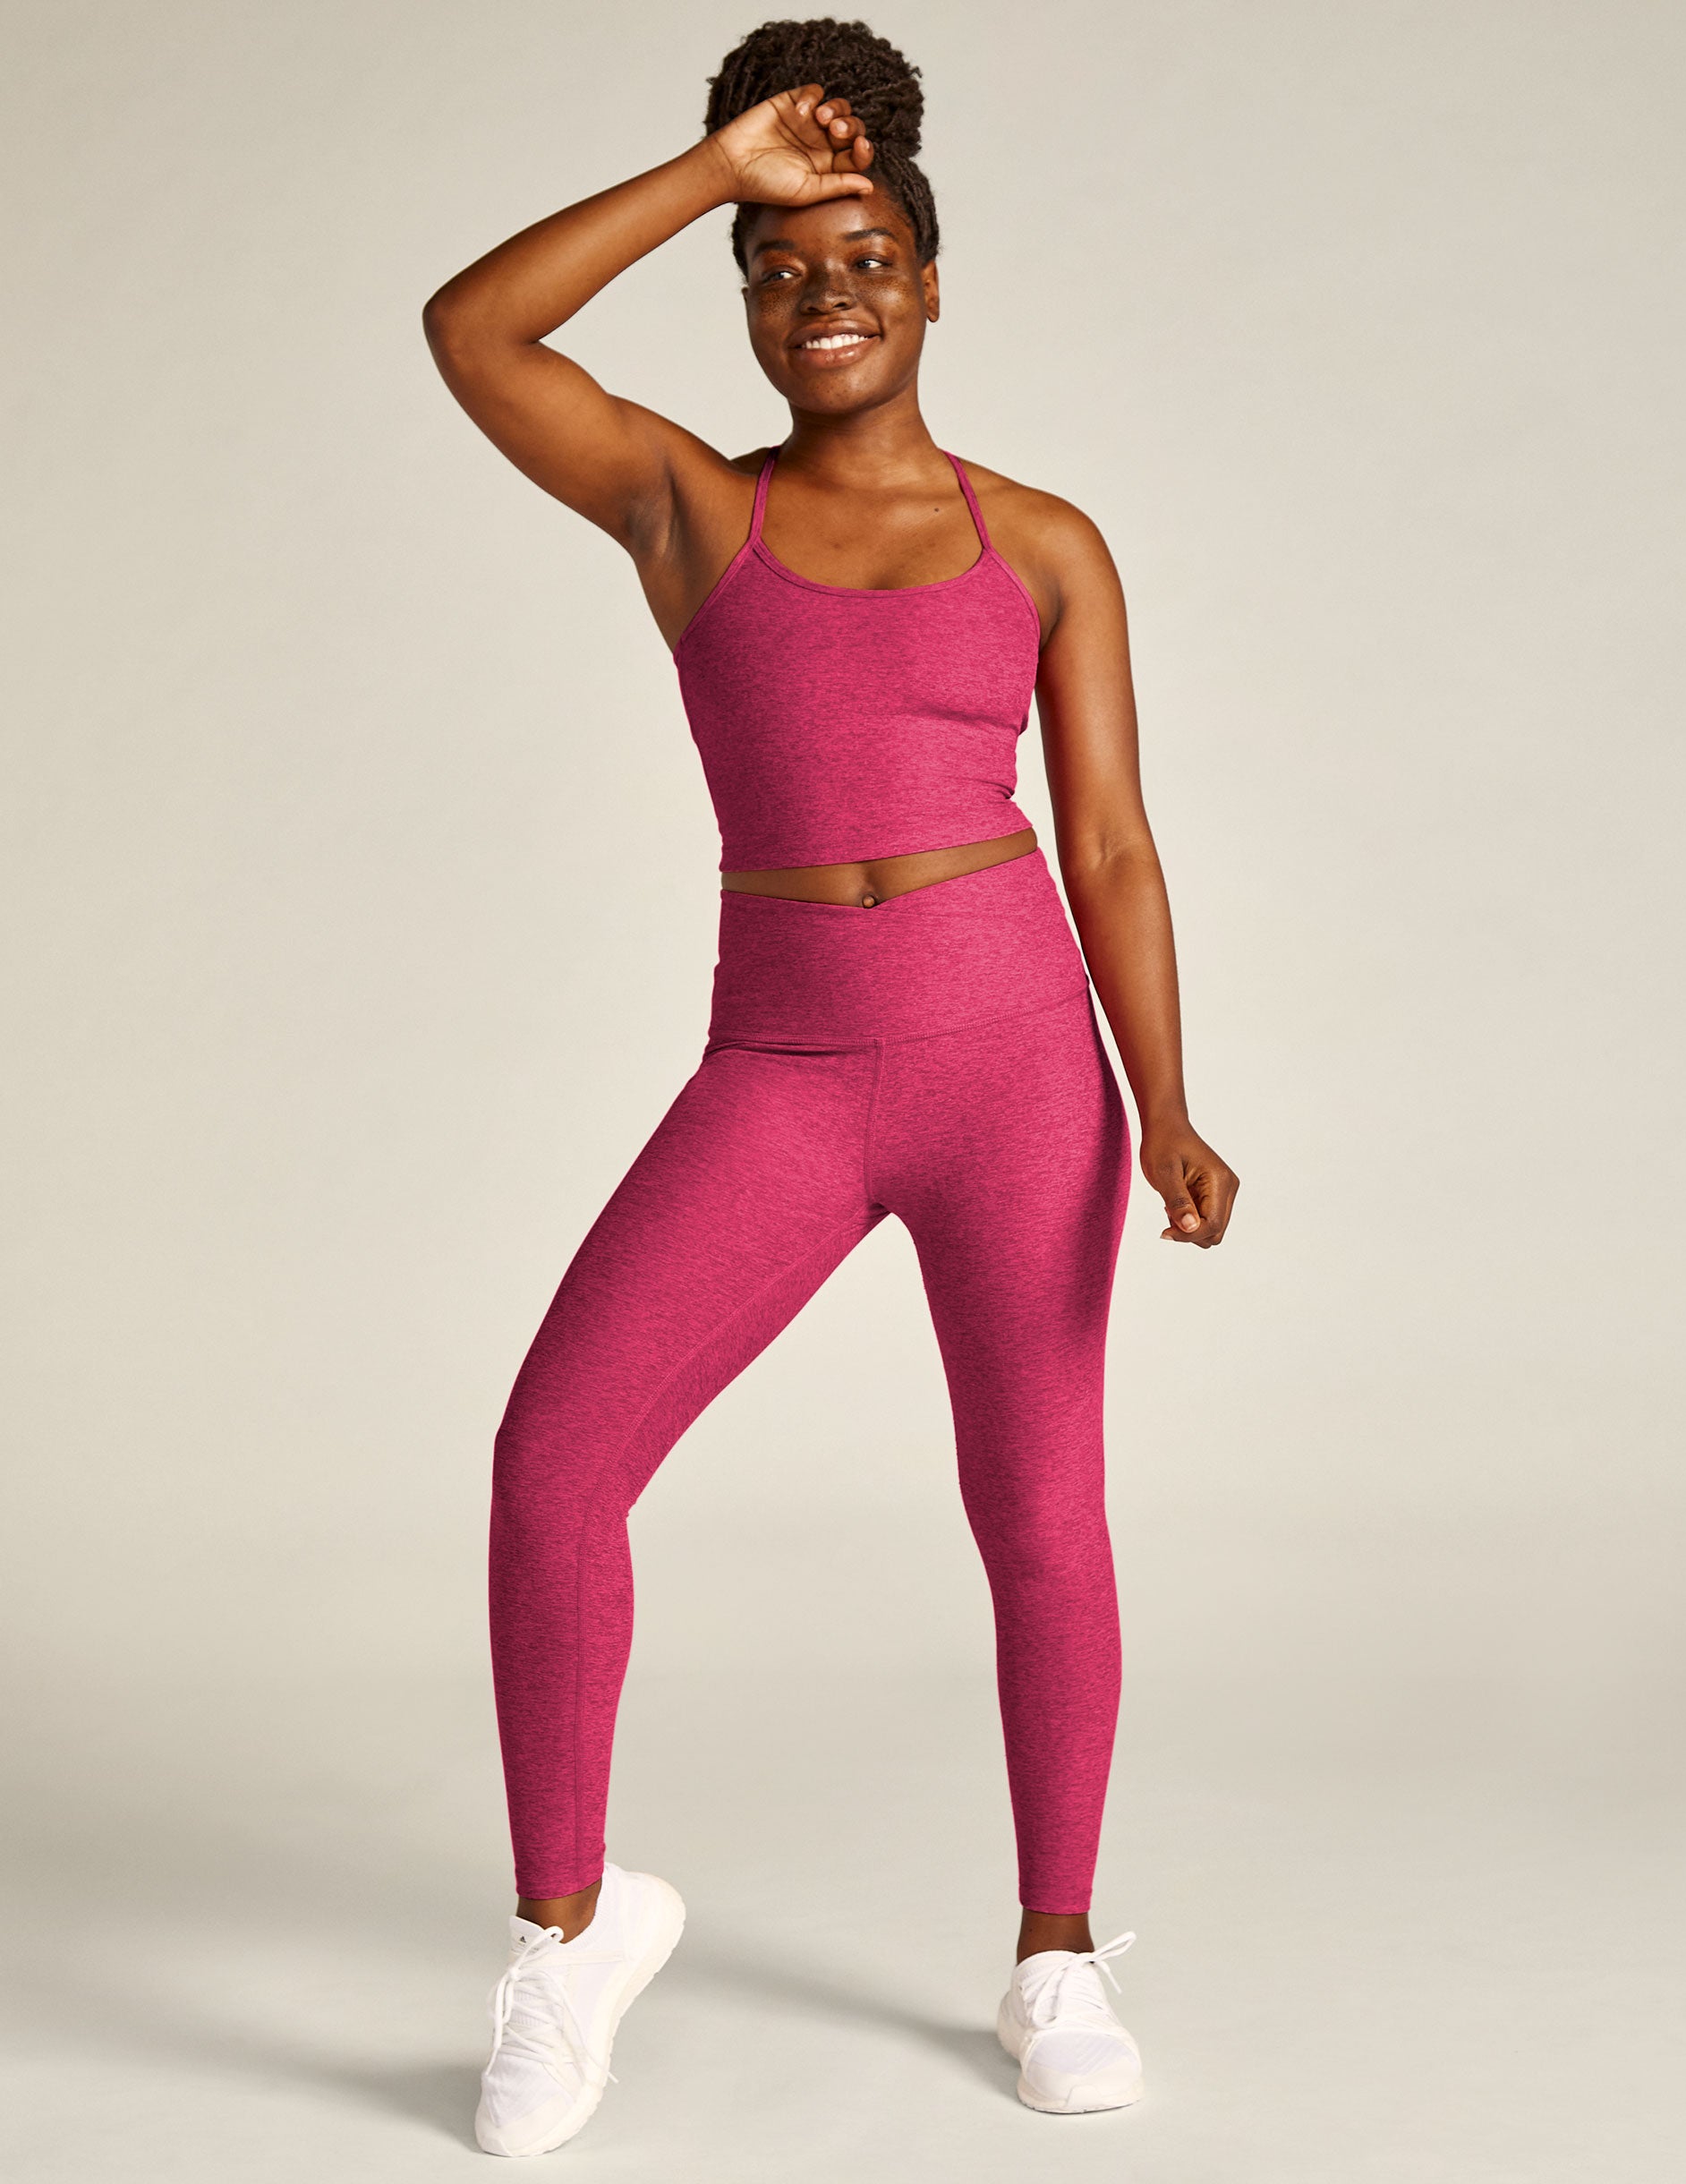 Urban Outfitters Beyond Yoga At Your Leisure Spacedye Pant